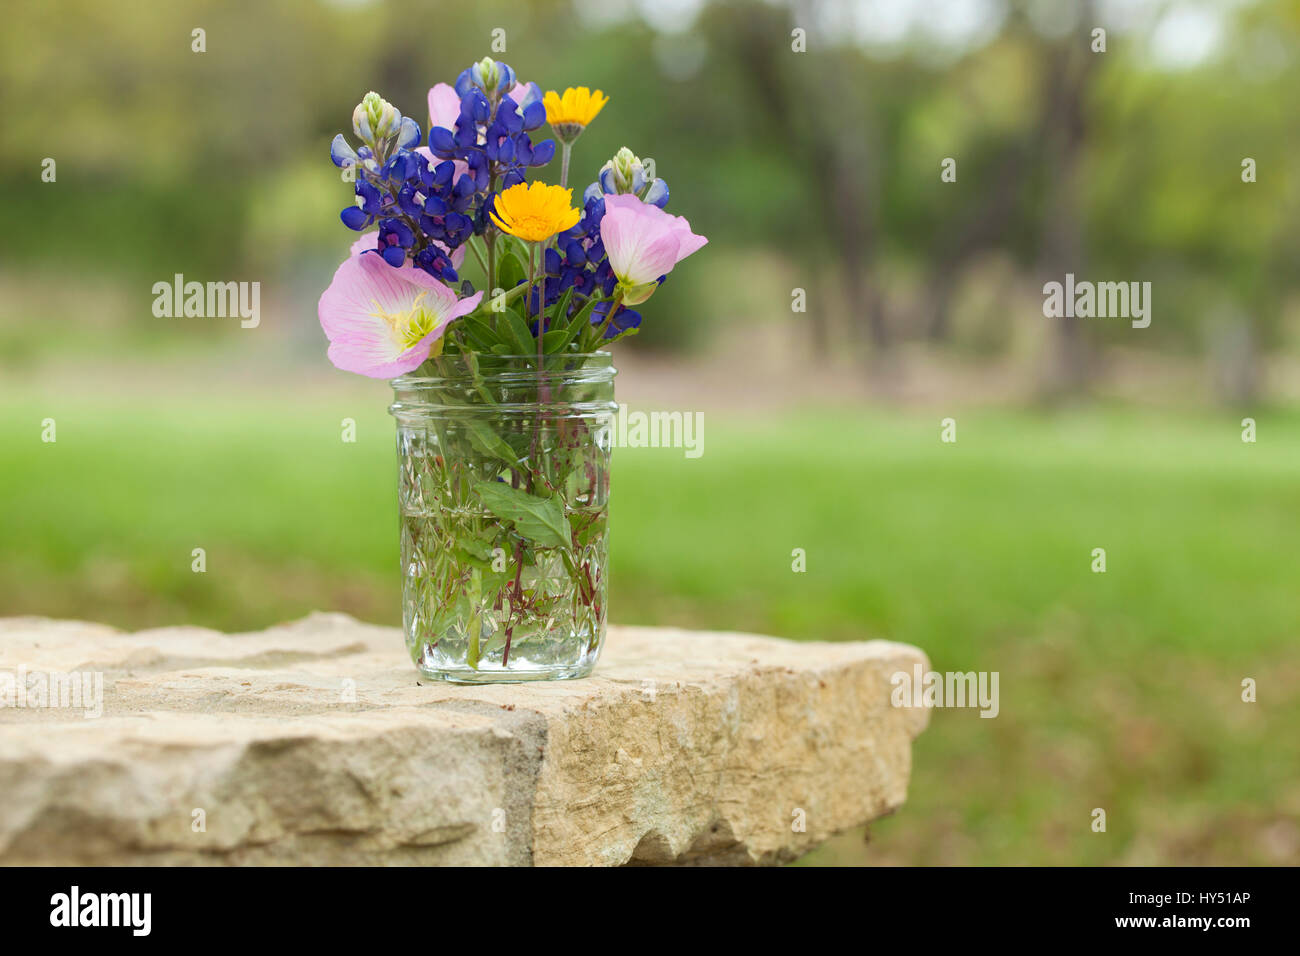 A bouquet of Texas wildflowers from the Texas Hill Country in a mason jar on a stone wall. Evening primroses, bluebonnets and yellow daisies. Stock Photo